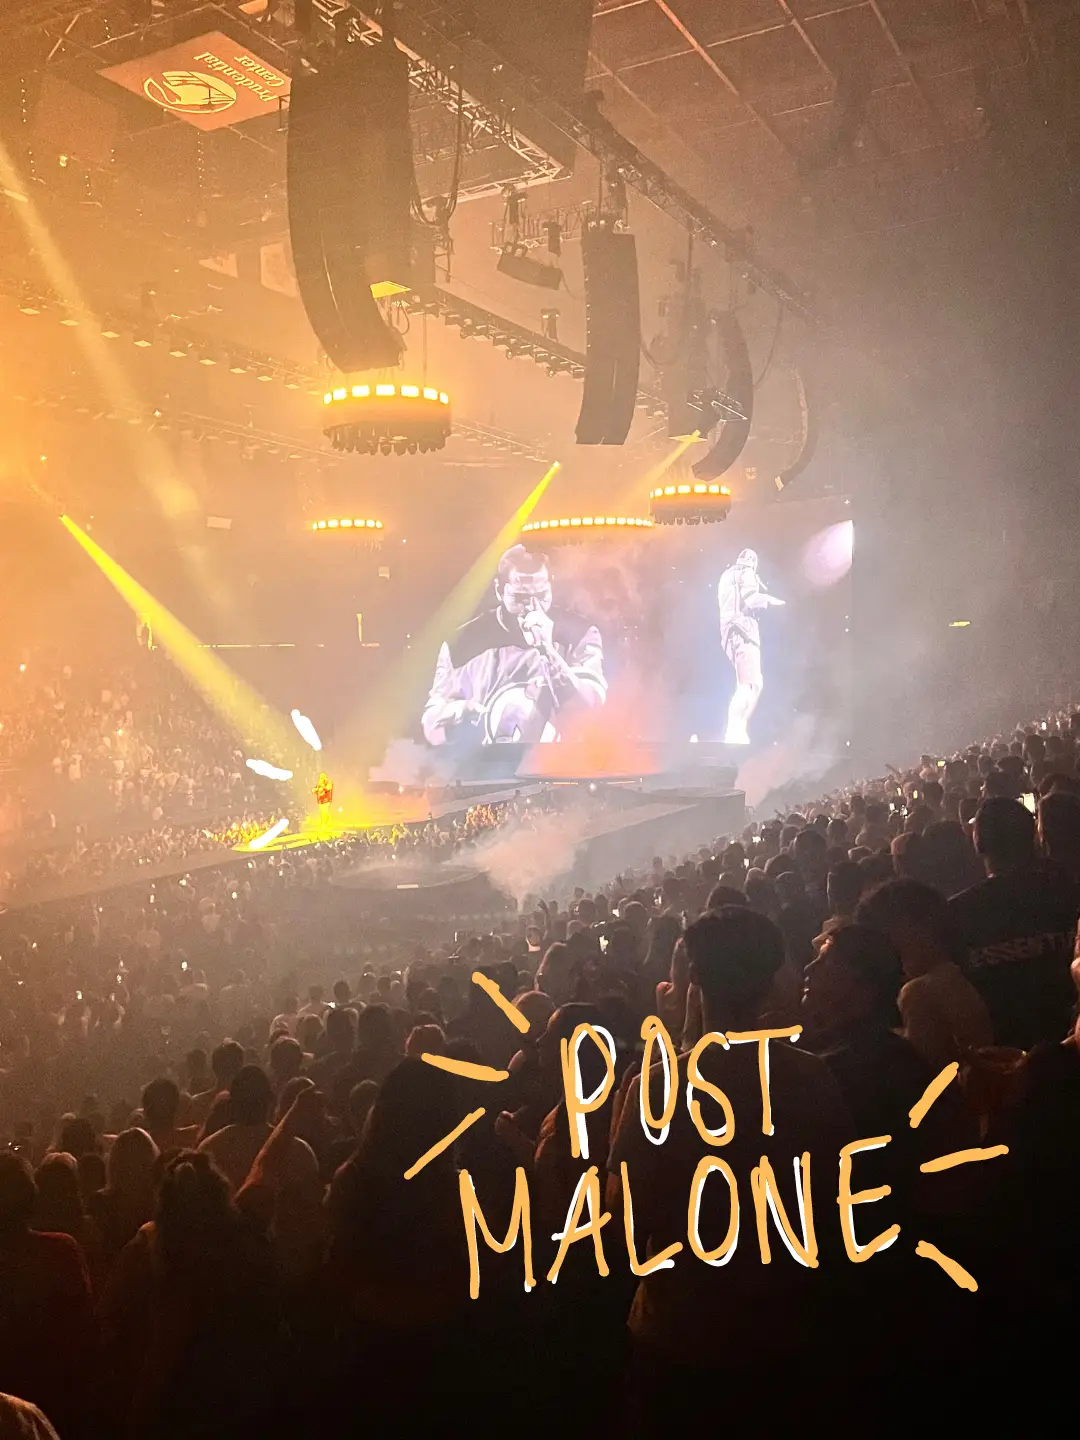  A concert at the Prudential Center with POST MALONE as the artist.